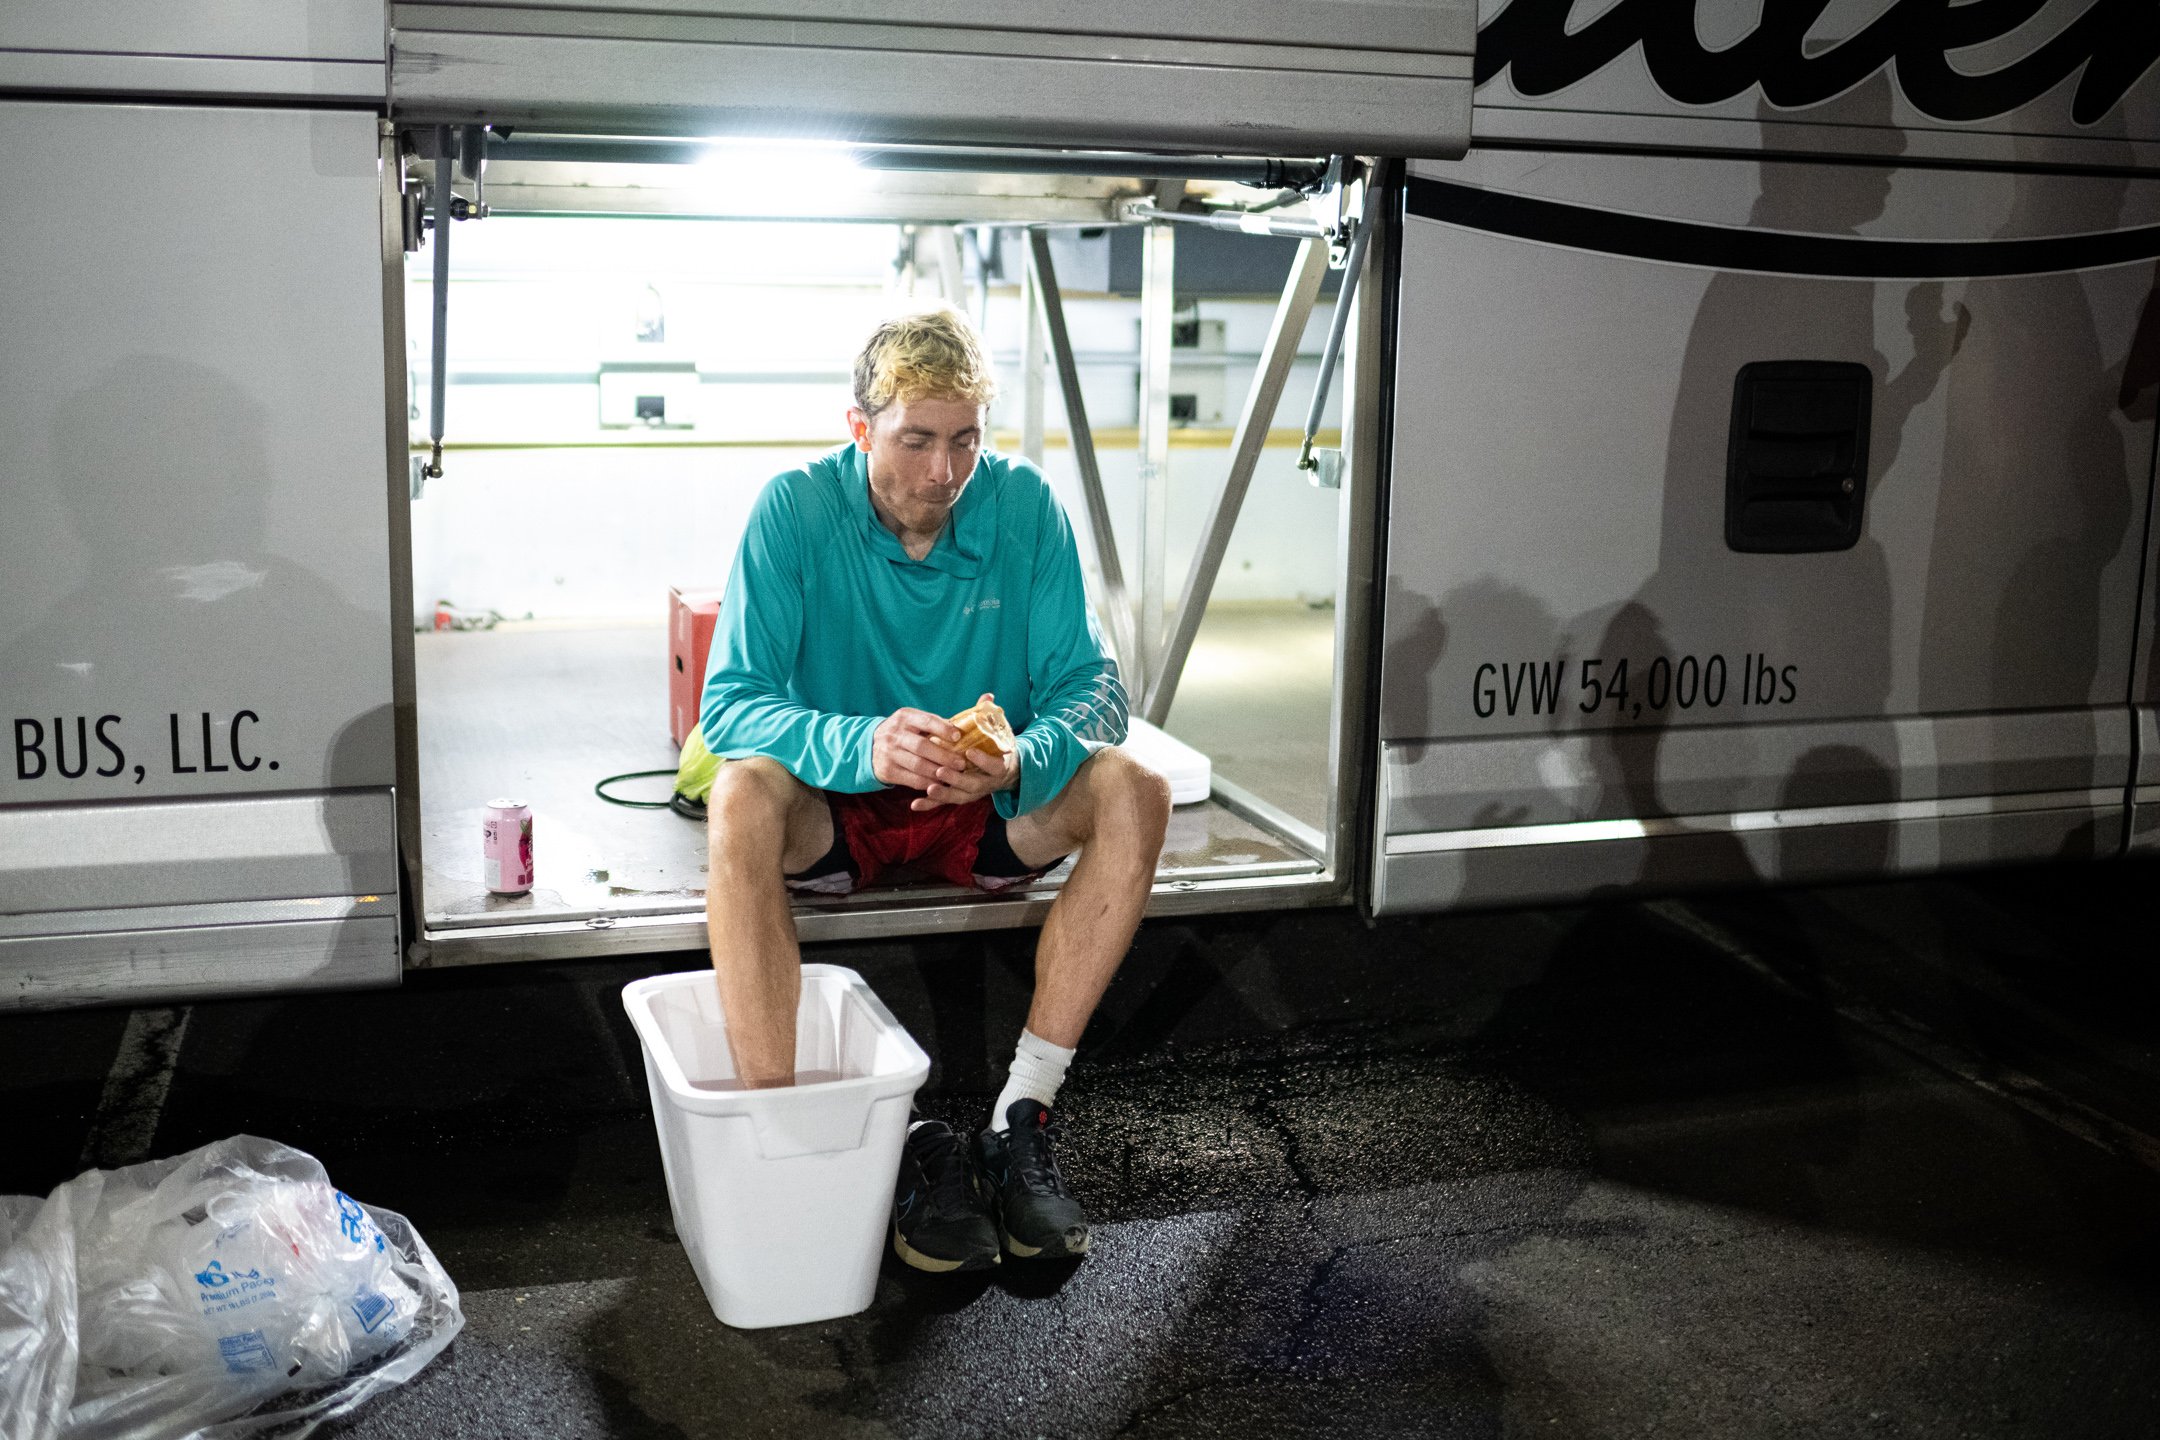  DC Breeze player Rowan McDonnell ices his foot in a styrofoam cooler and eats a sandwich while sitting in the luggage bay under the team bus, during a team meal after an away game against the Philadelphia Phoenix in the American Ultimate Disc League